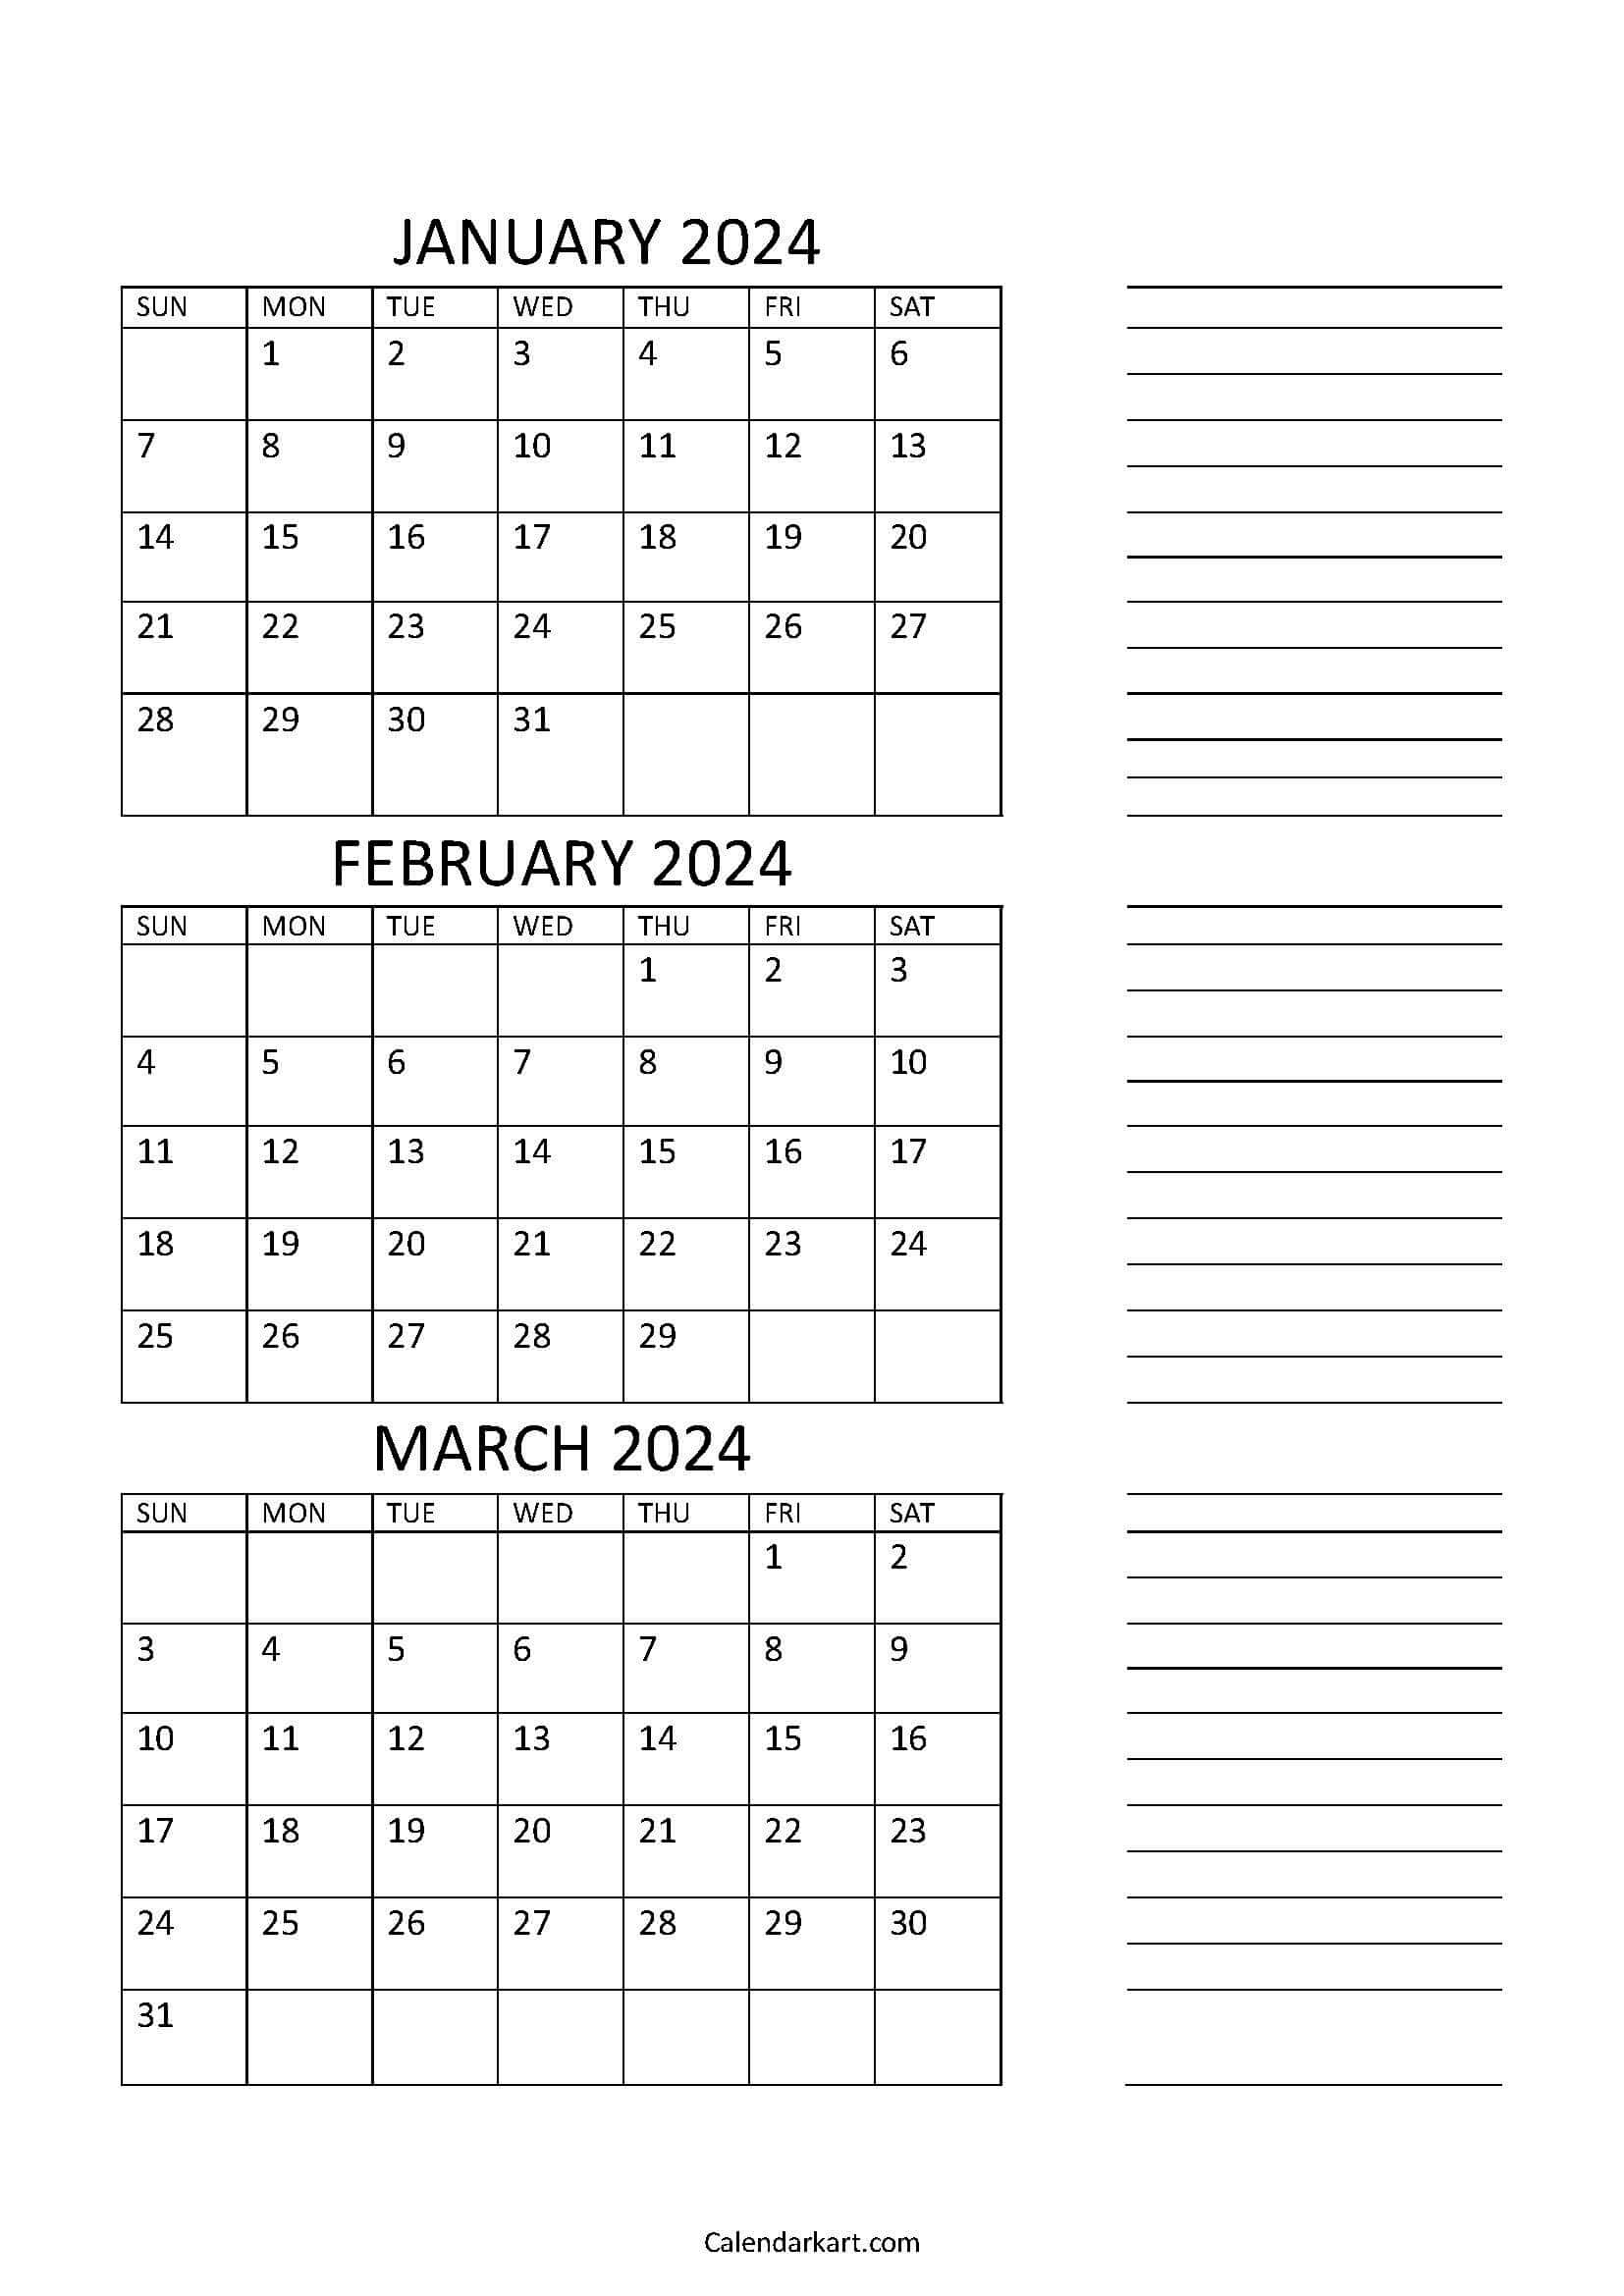 Free Printable January To March 2024 Calendar - Calendarkart with Free Printable Calendar 2024 3 Month Calendar